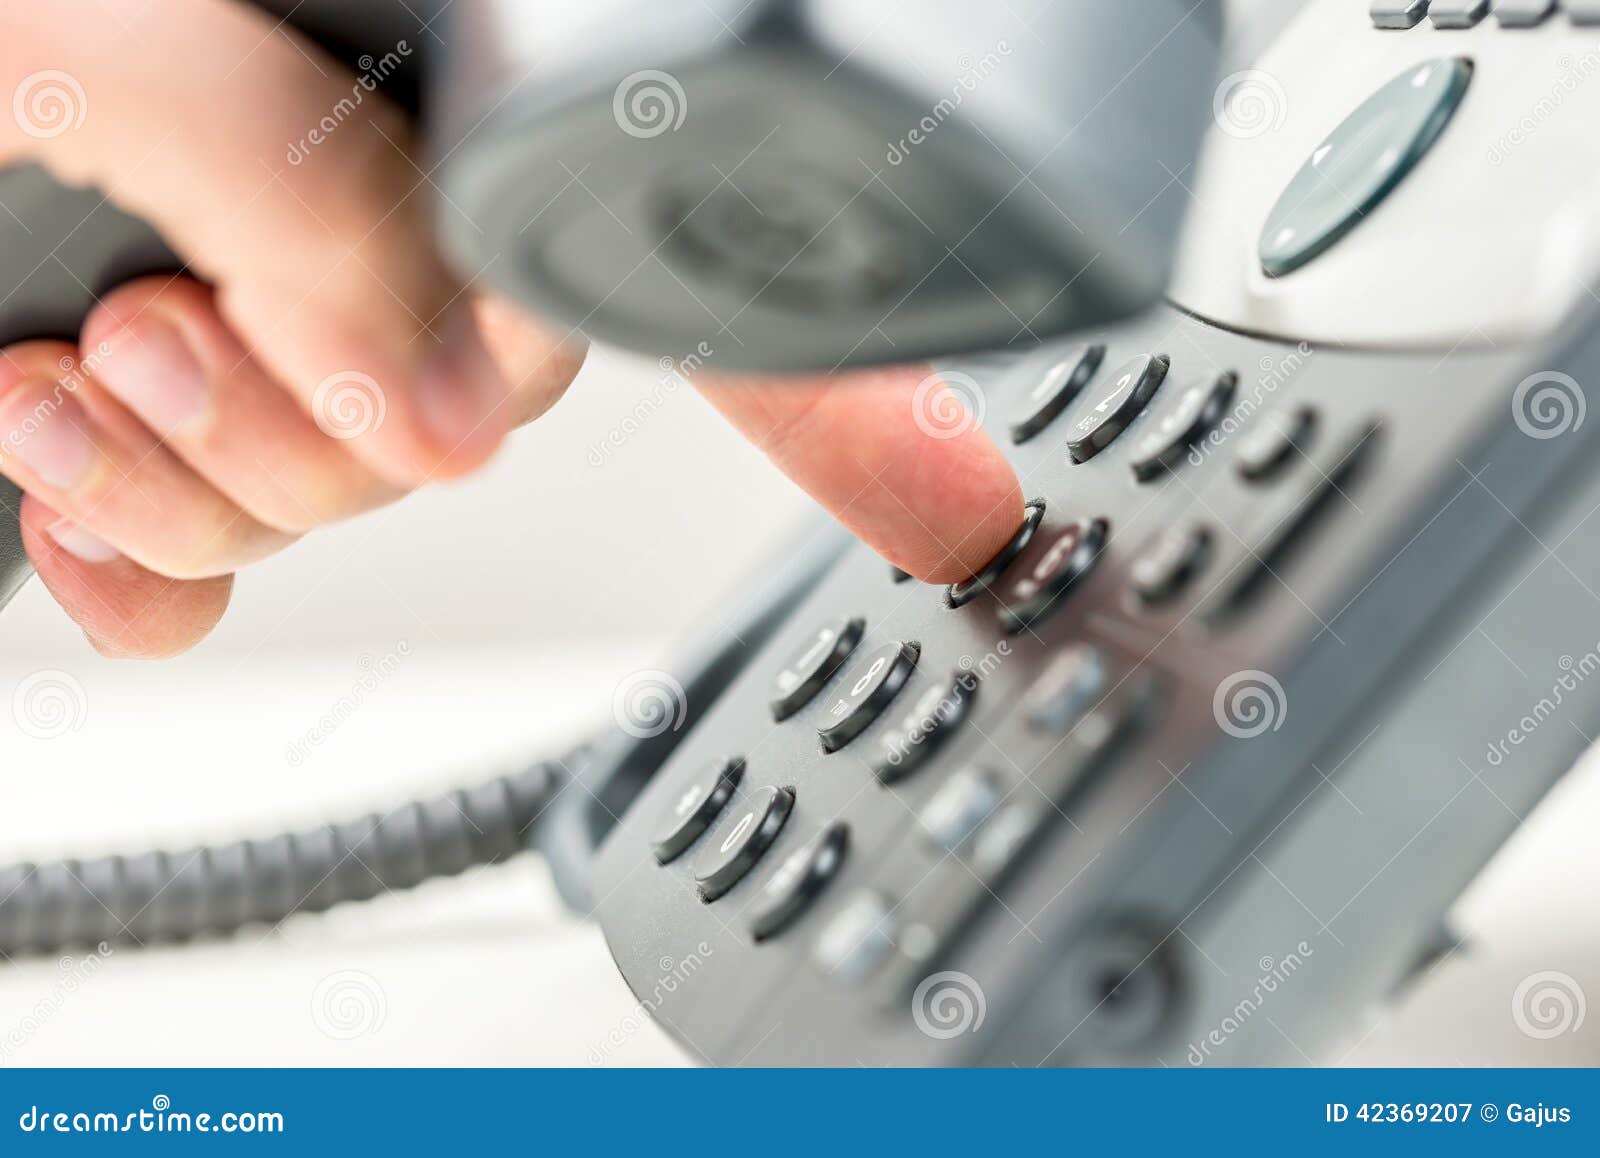 man dialling out on a telephone